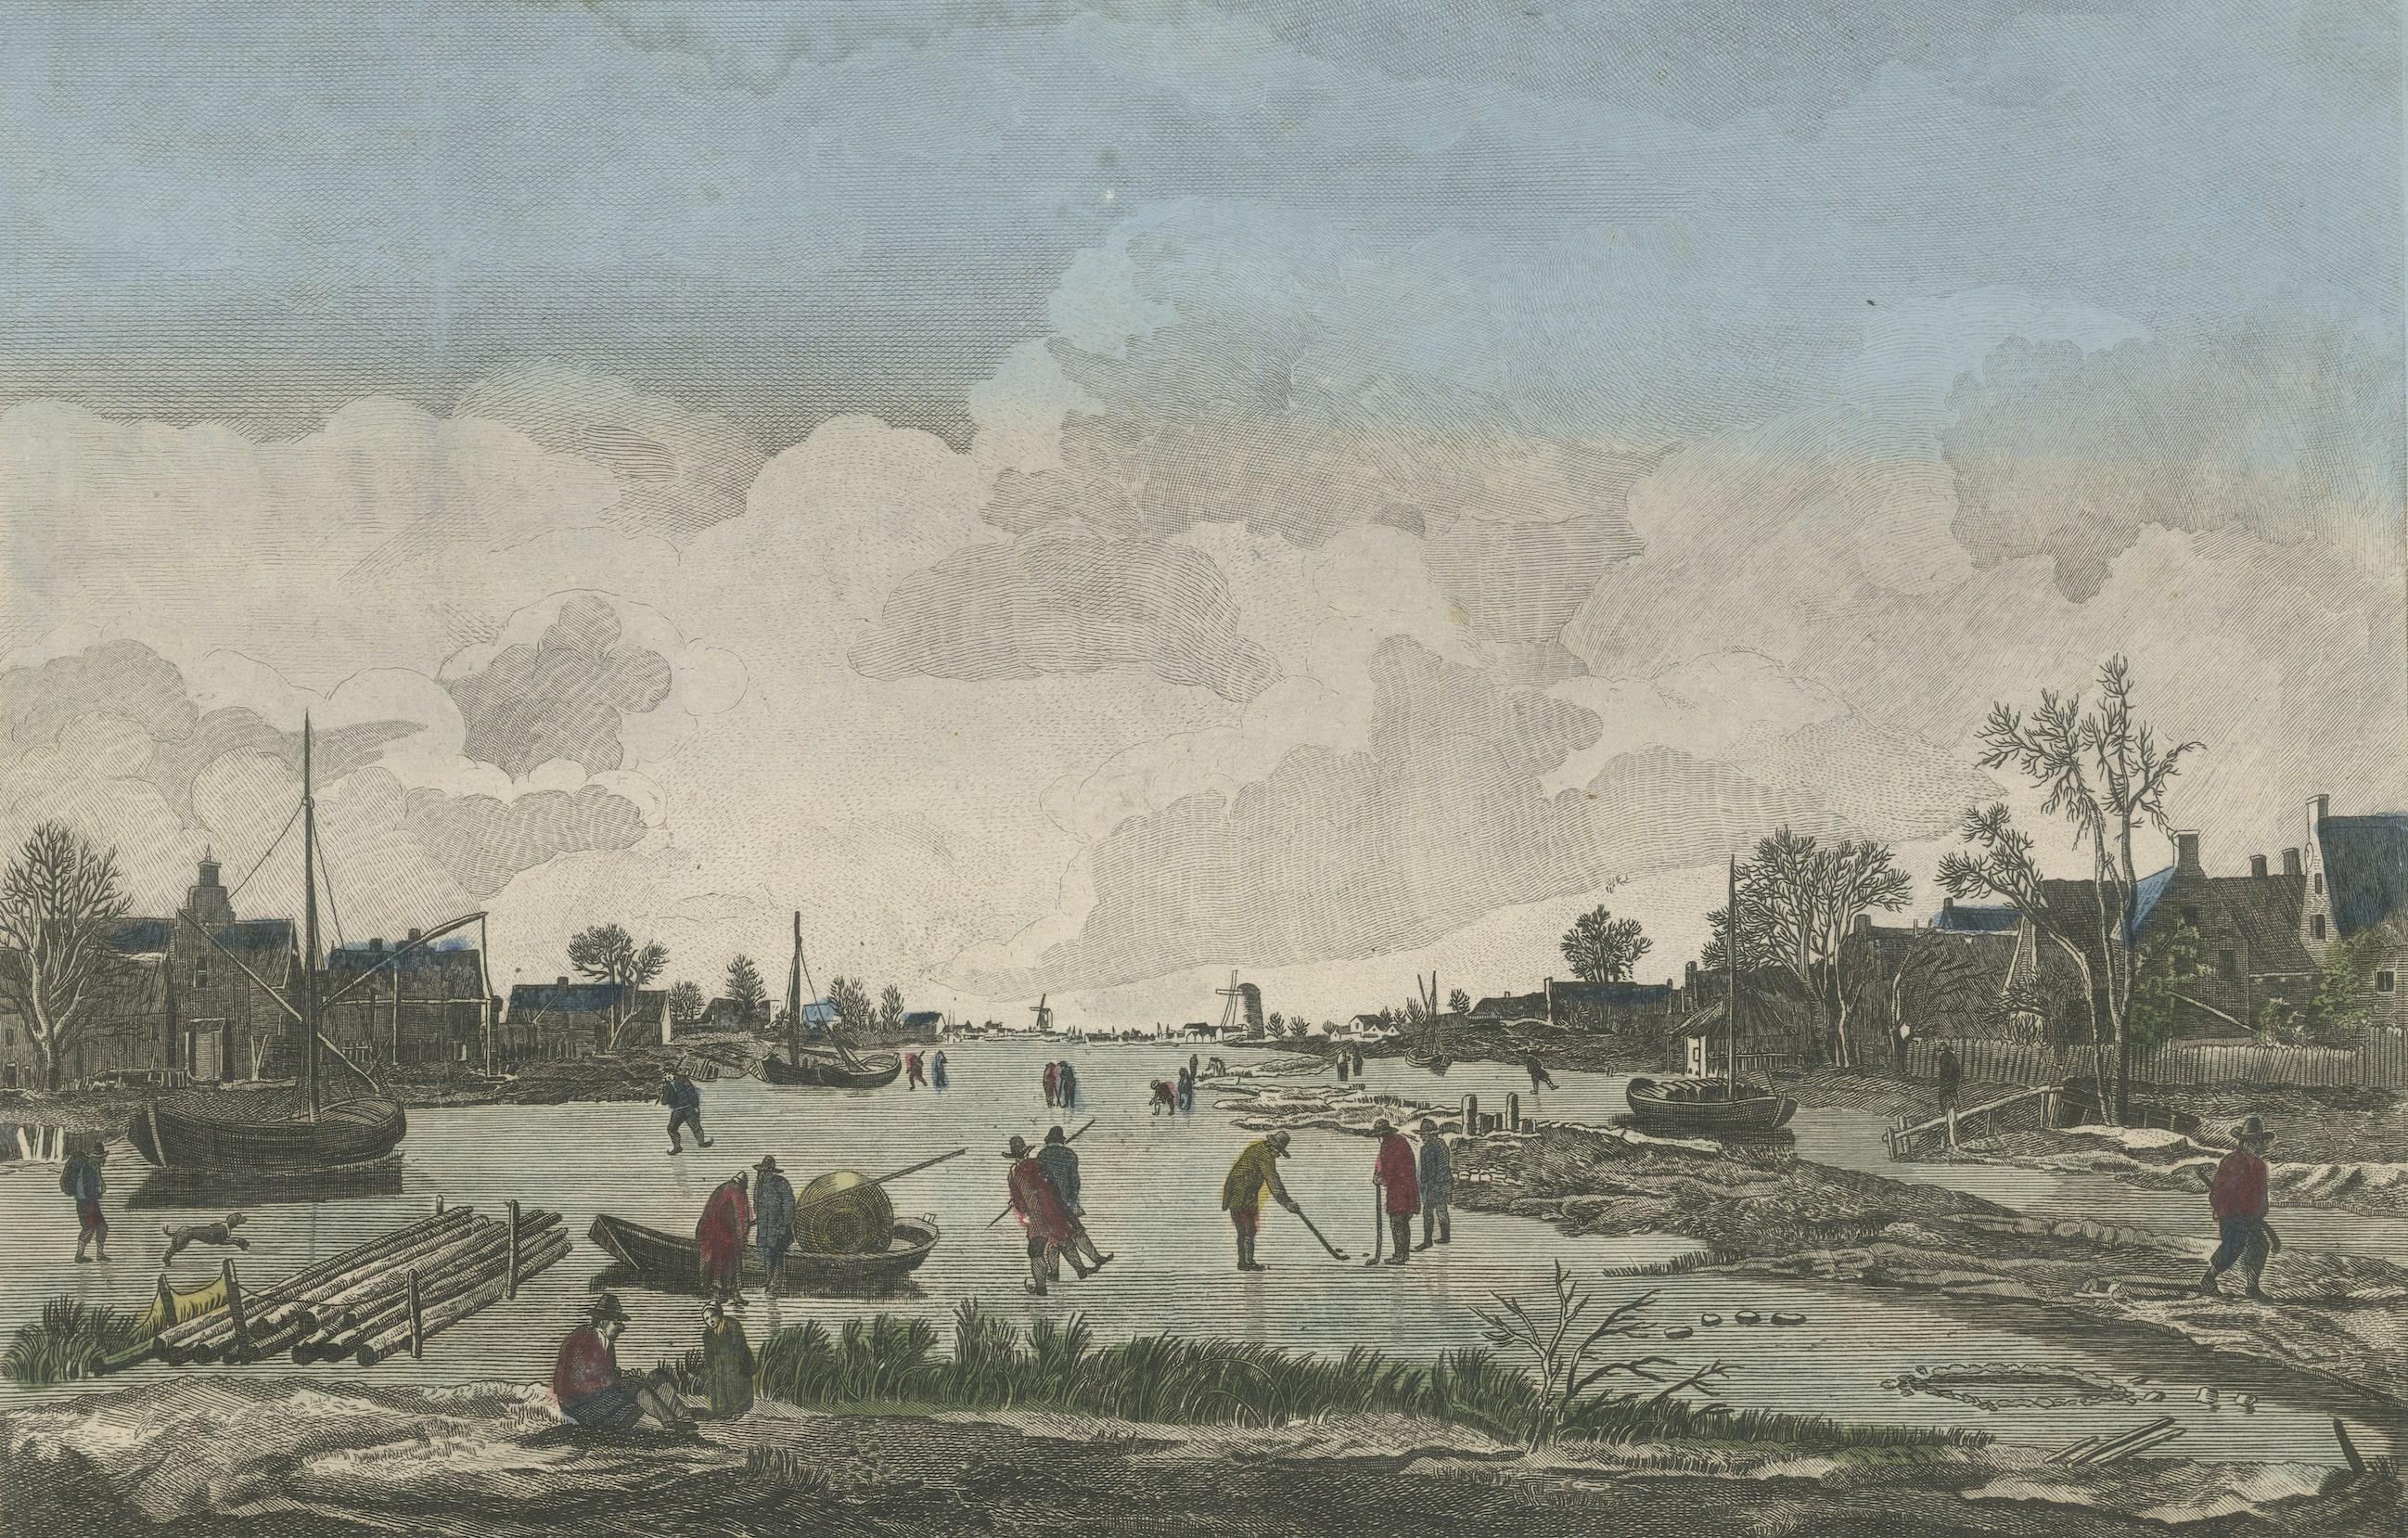 Antique print titled 'Hyver. Vue de Santvliet Village de Hollande'. Copper engraving made after a painting by Adriaen van Drever. This is an optical print, also called 'vue optique' or 'vue d'optique', which were made to be viewed through a